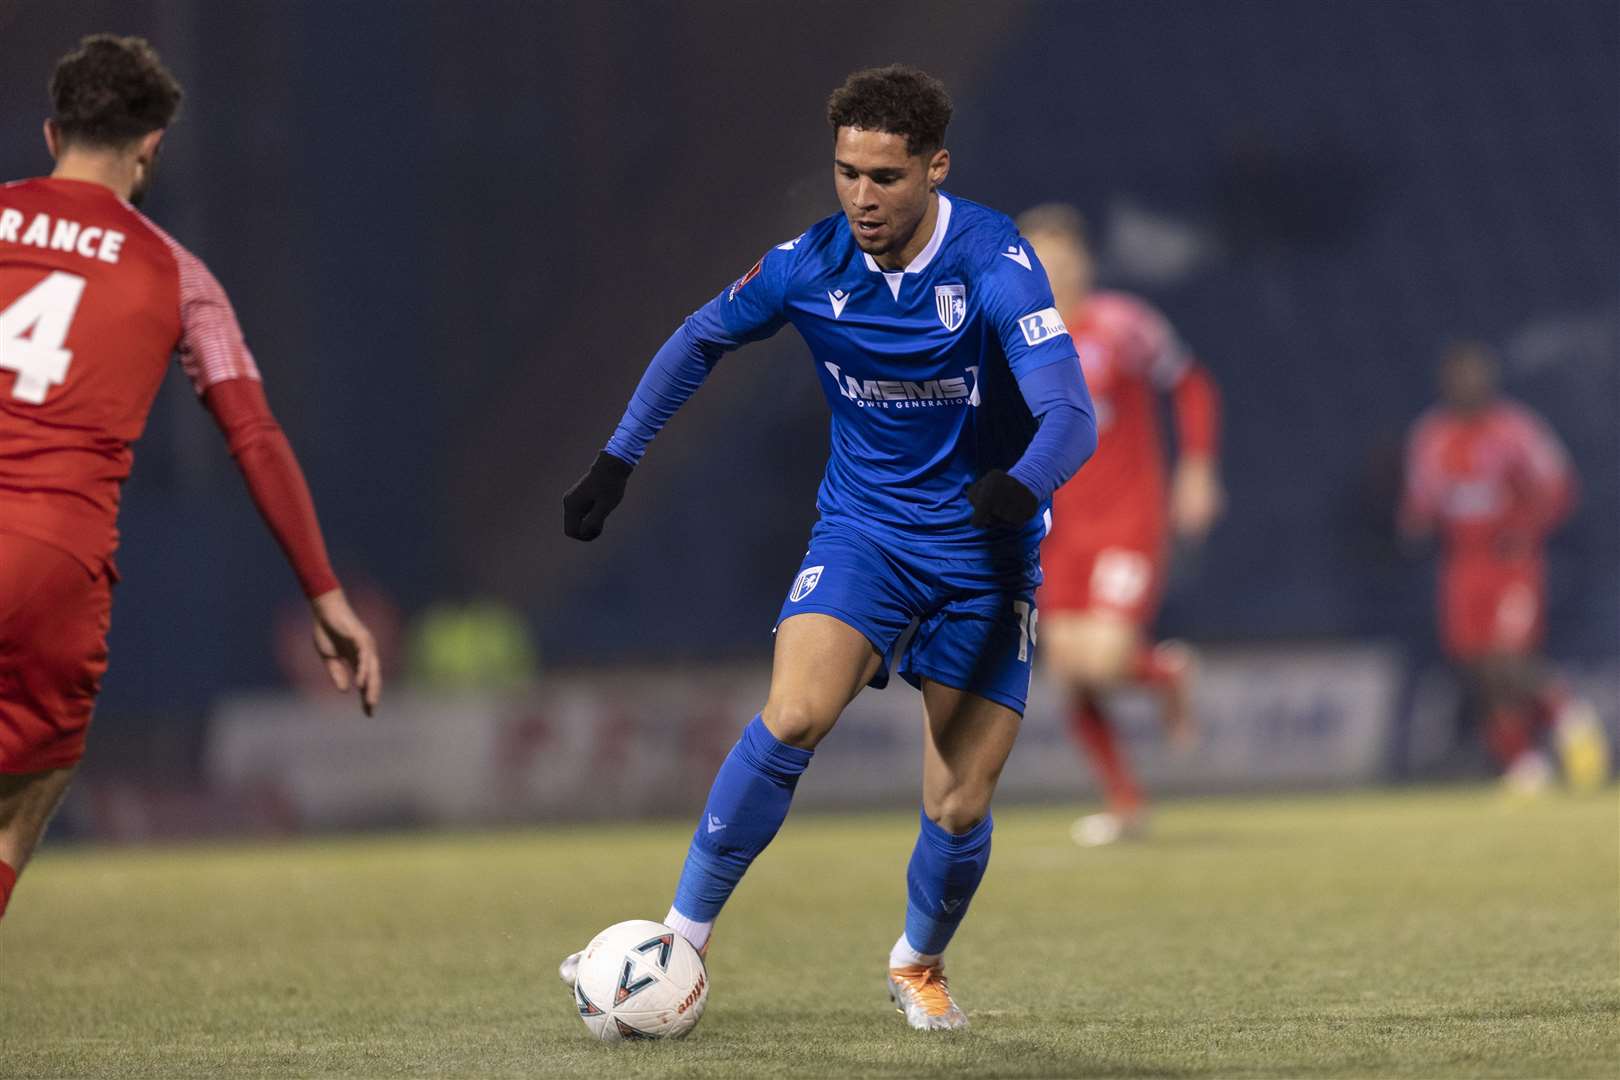 Lewis Walker in action against Dagenham as the Gills progress to round three of the FA Cup